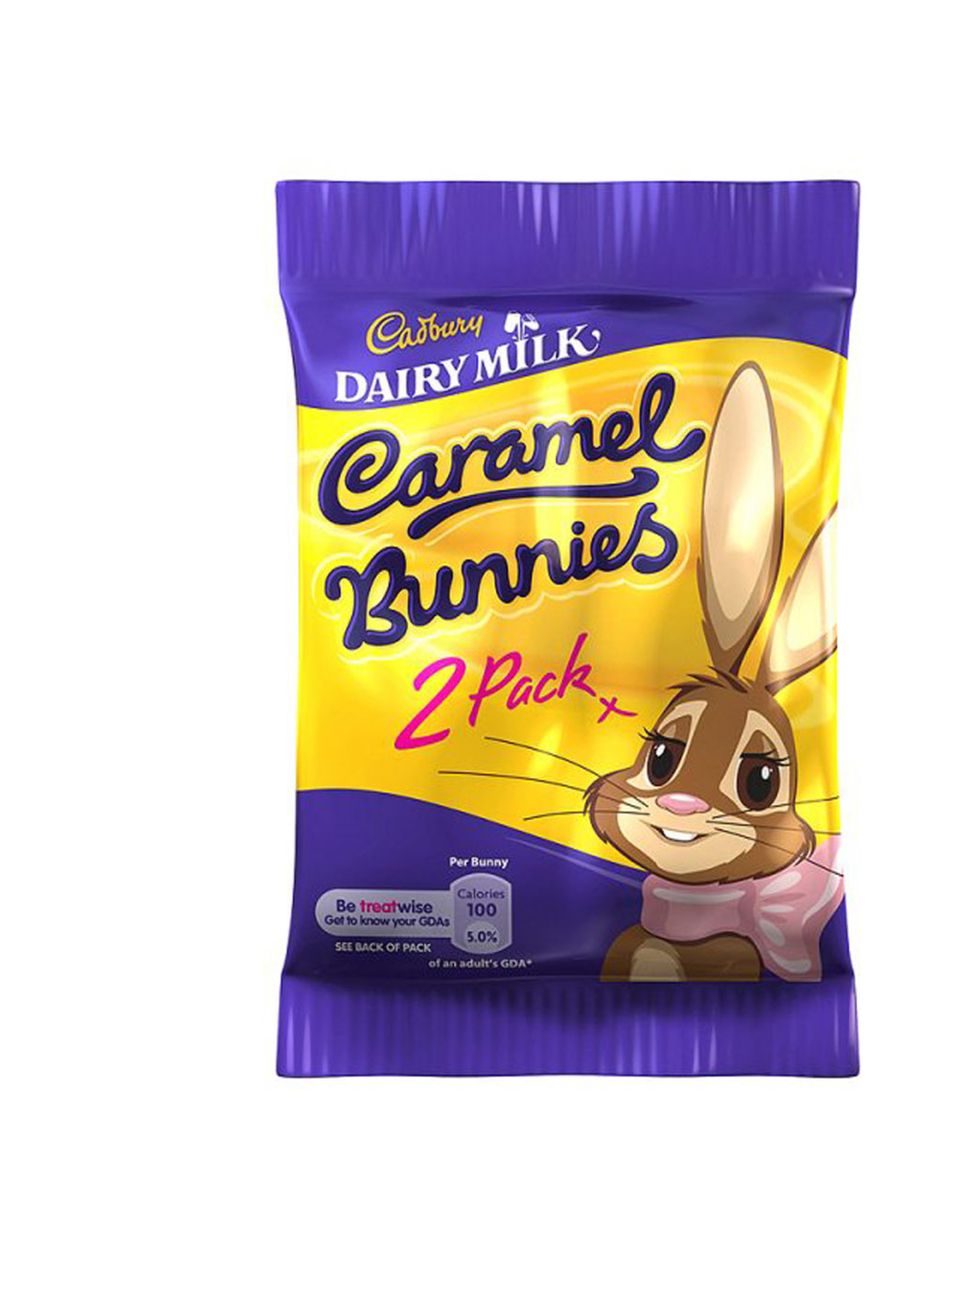 <p><strong>Treat: <a href="http://www.cadburygiftsdirect.co.uk/products/603-caramel-bunnies-40g.aspx">Cadbury Caramel Bunnies</a></strong></p><p><strong>Calories: 100 Calories per bunny</strong><strong>Activity: Bowling</strong><strong>Time: 30 minutes</s